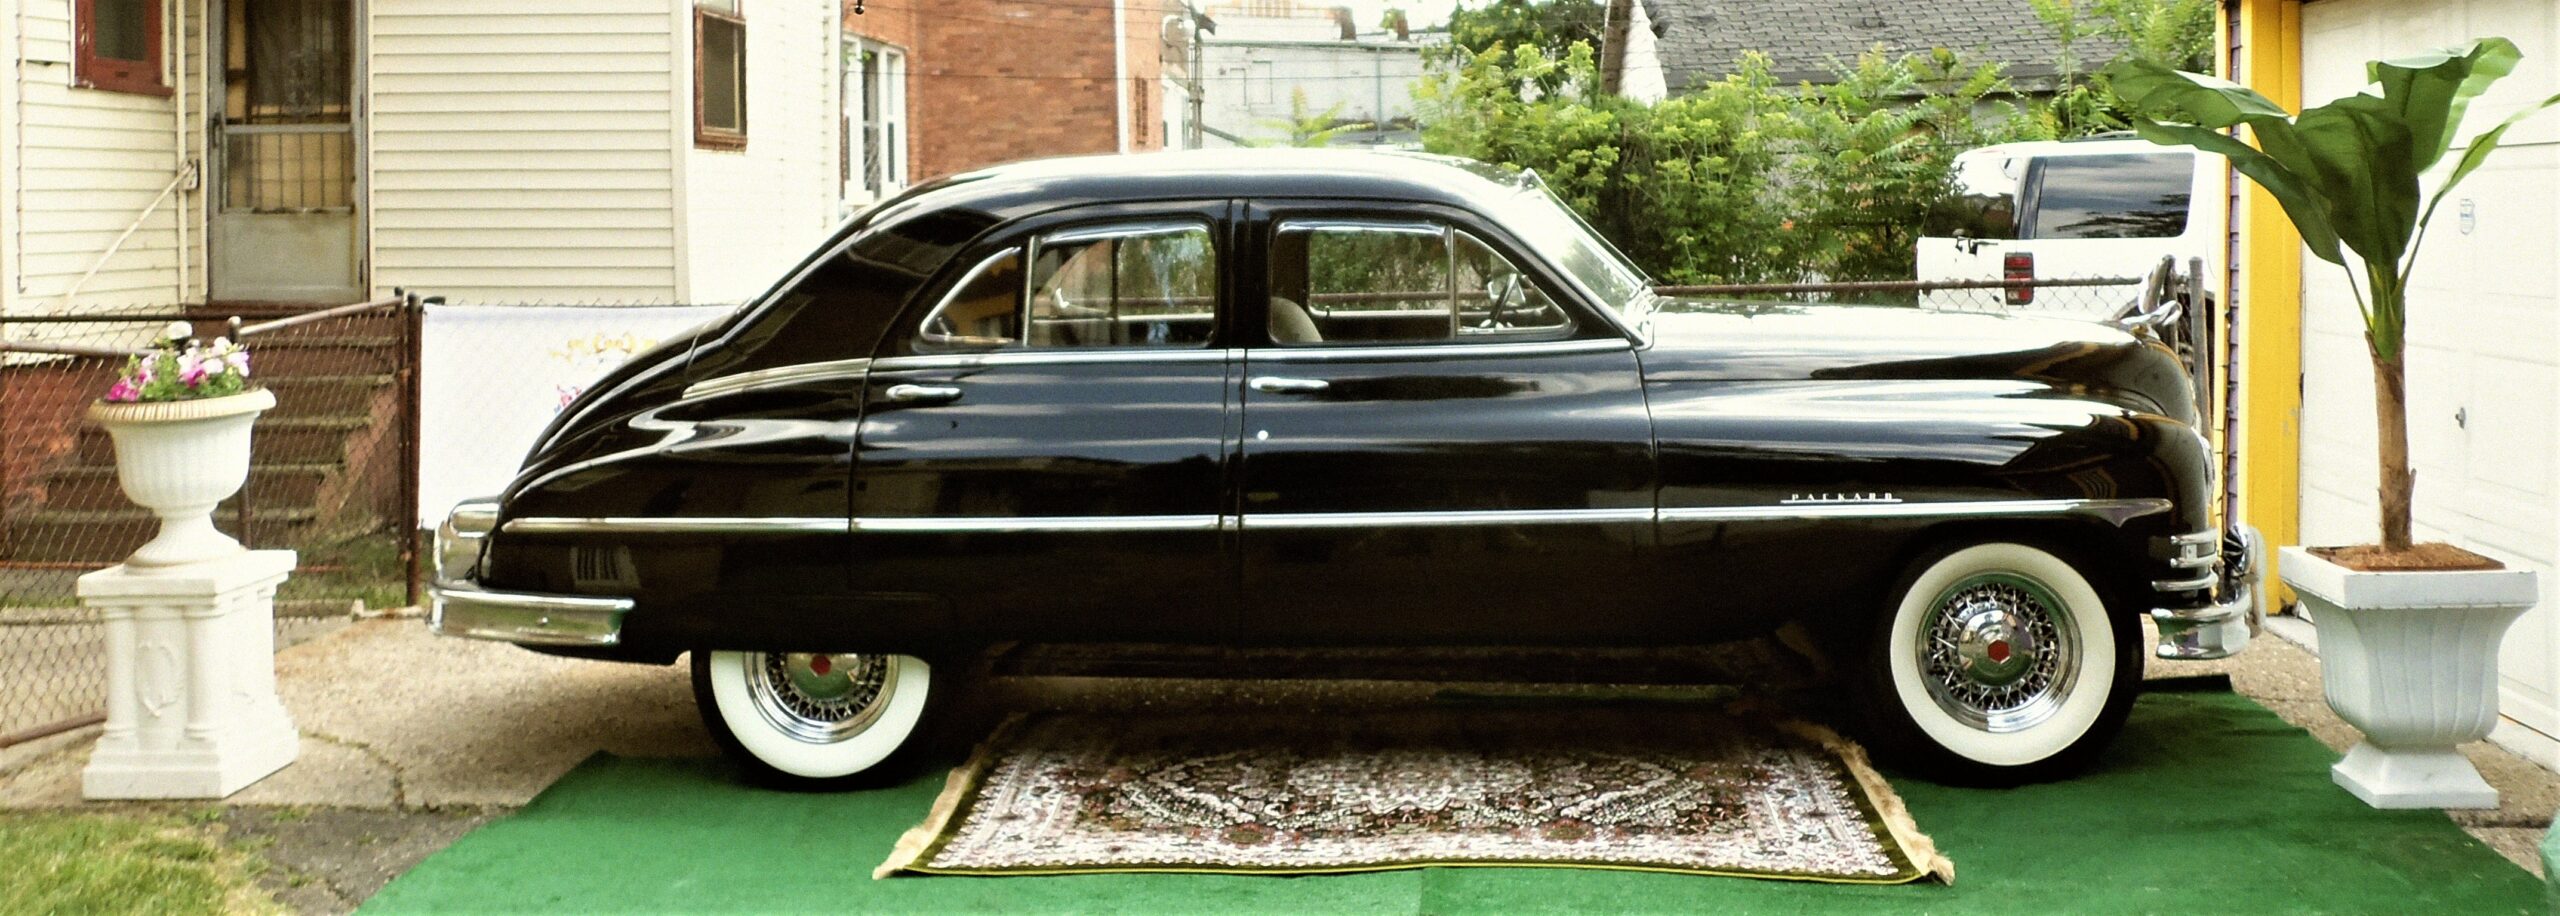 The Contessa, a 1949 Packard Eight Deluxe Touring Sedan with a Chevrolet 350 V-8 engine, currently undergoing restoration.